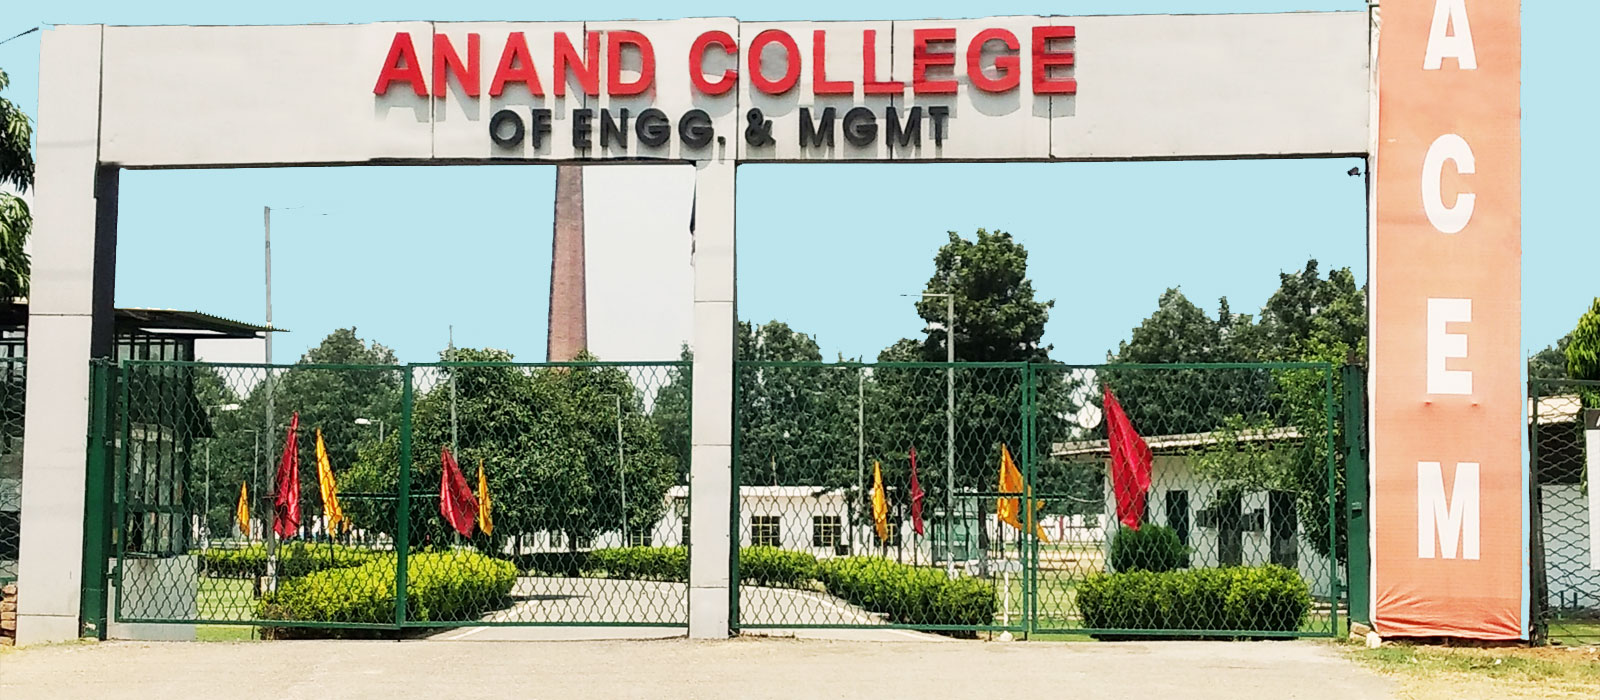 Anand College of Engineering and Management, Kapurthala Image